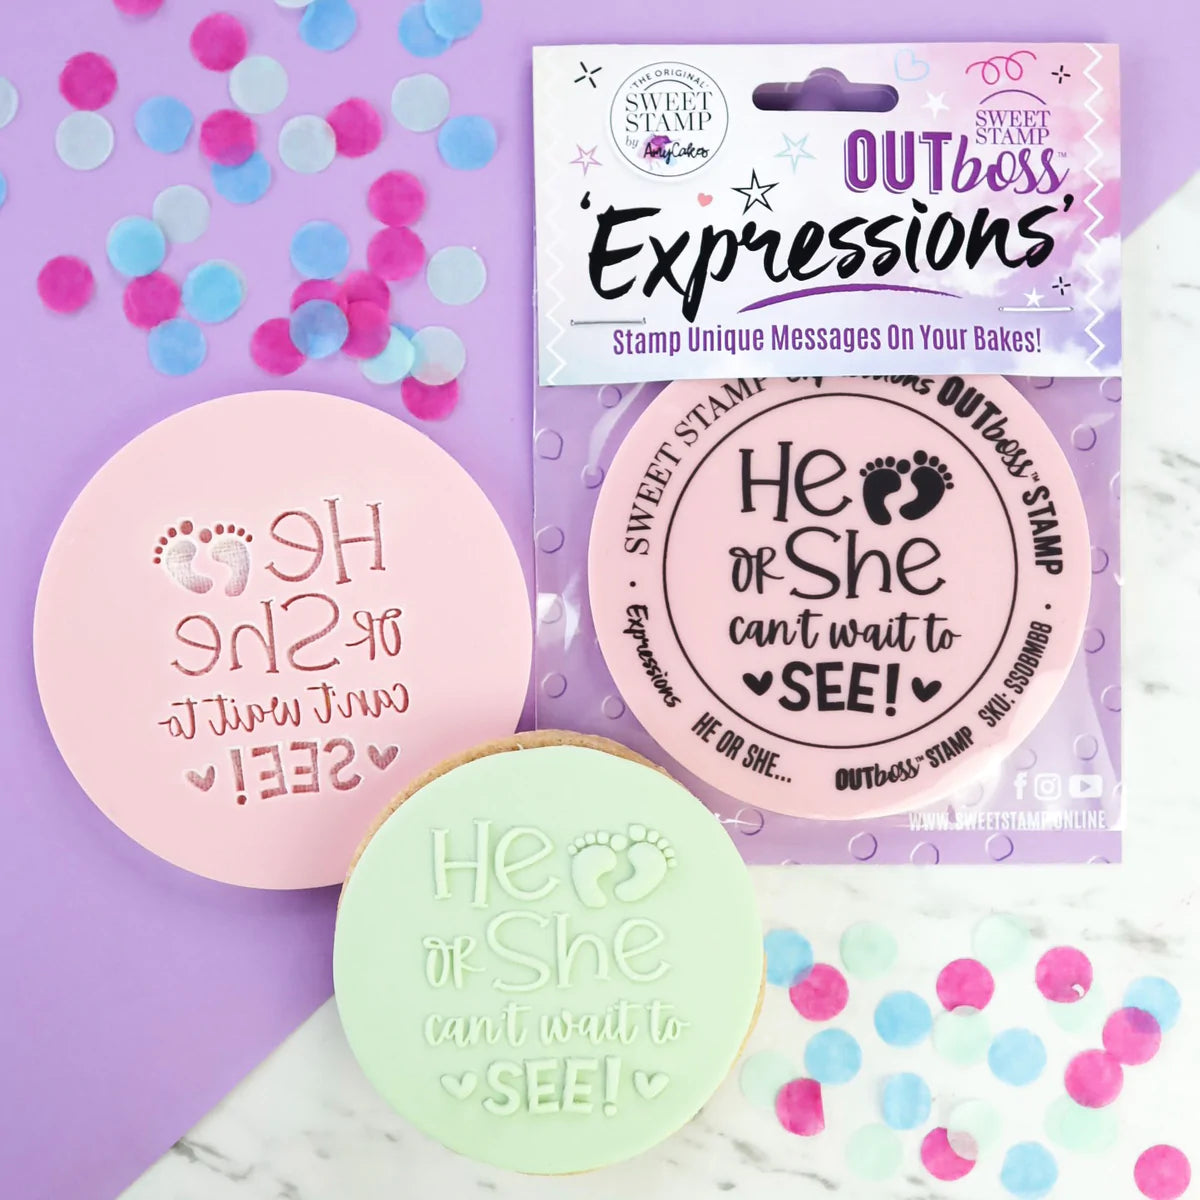 Sweet Stamp OUTboss Outbossing Sugarcraft Stamp - He or She Can't Wait to See with Baby Feet